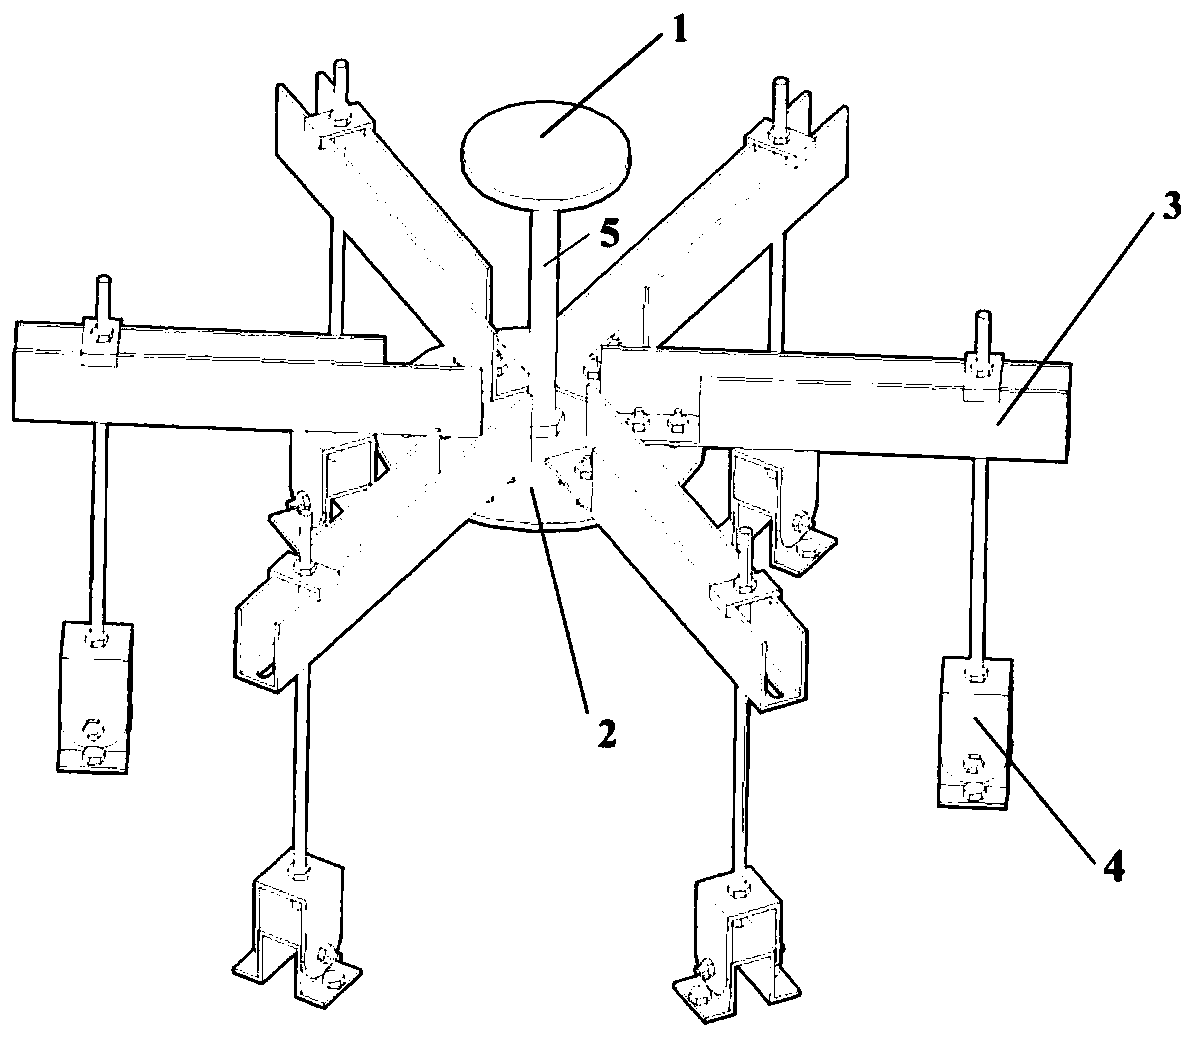 A combined ceiling suspension device and installation method under a tall curved steel structure